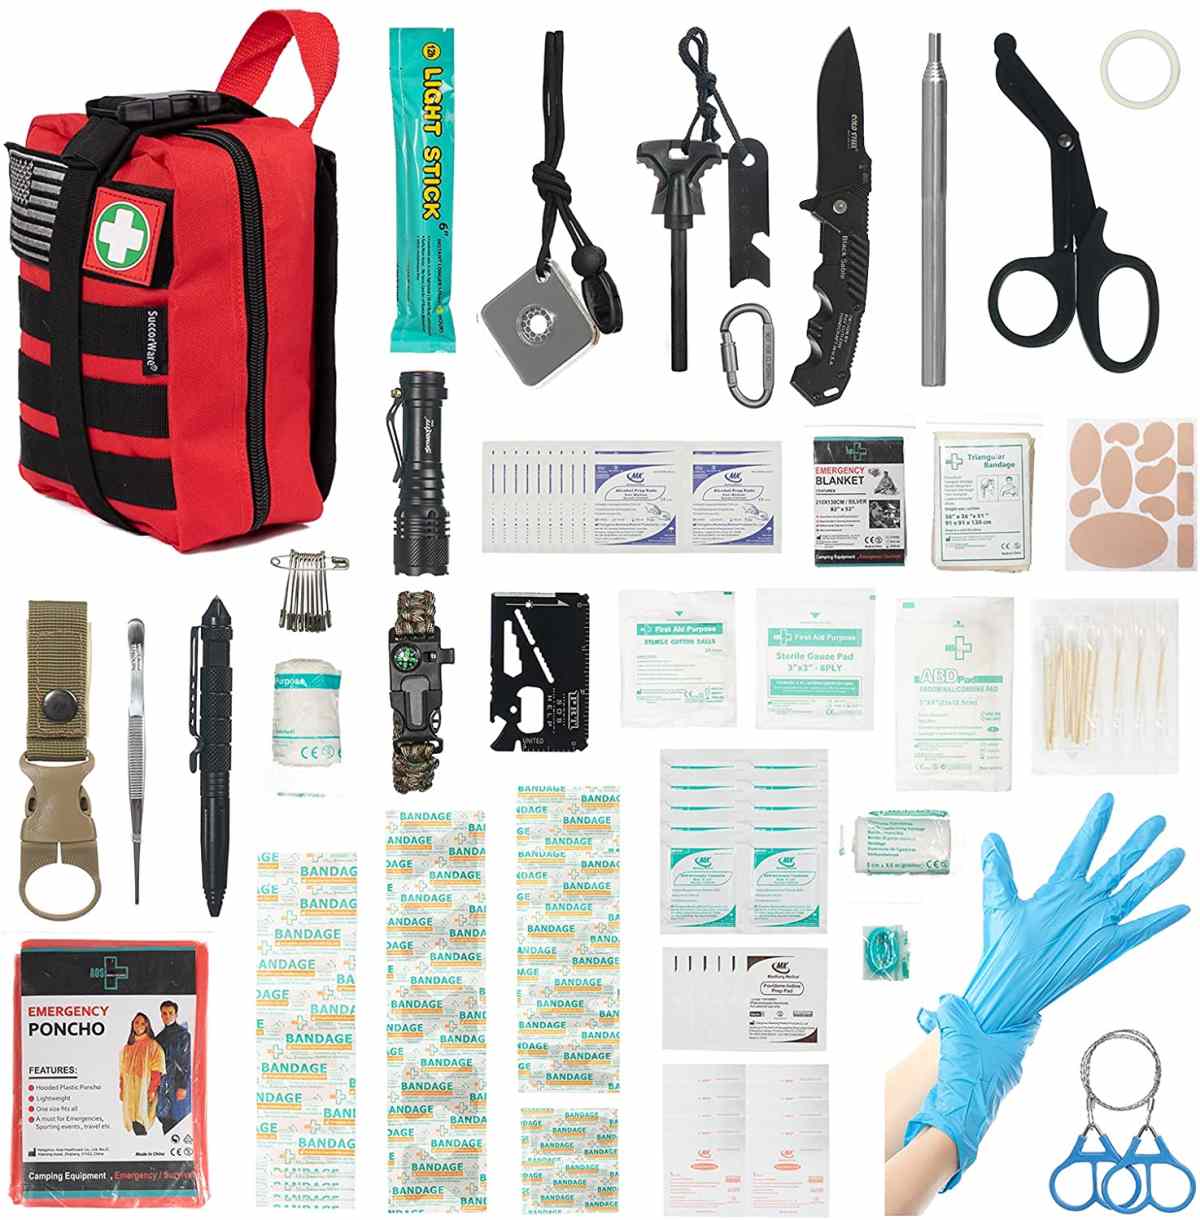 Red Multi-Purpose First Aid Survival Gear for Camping